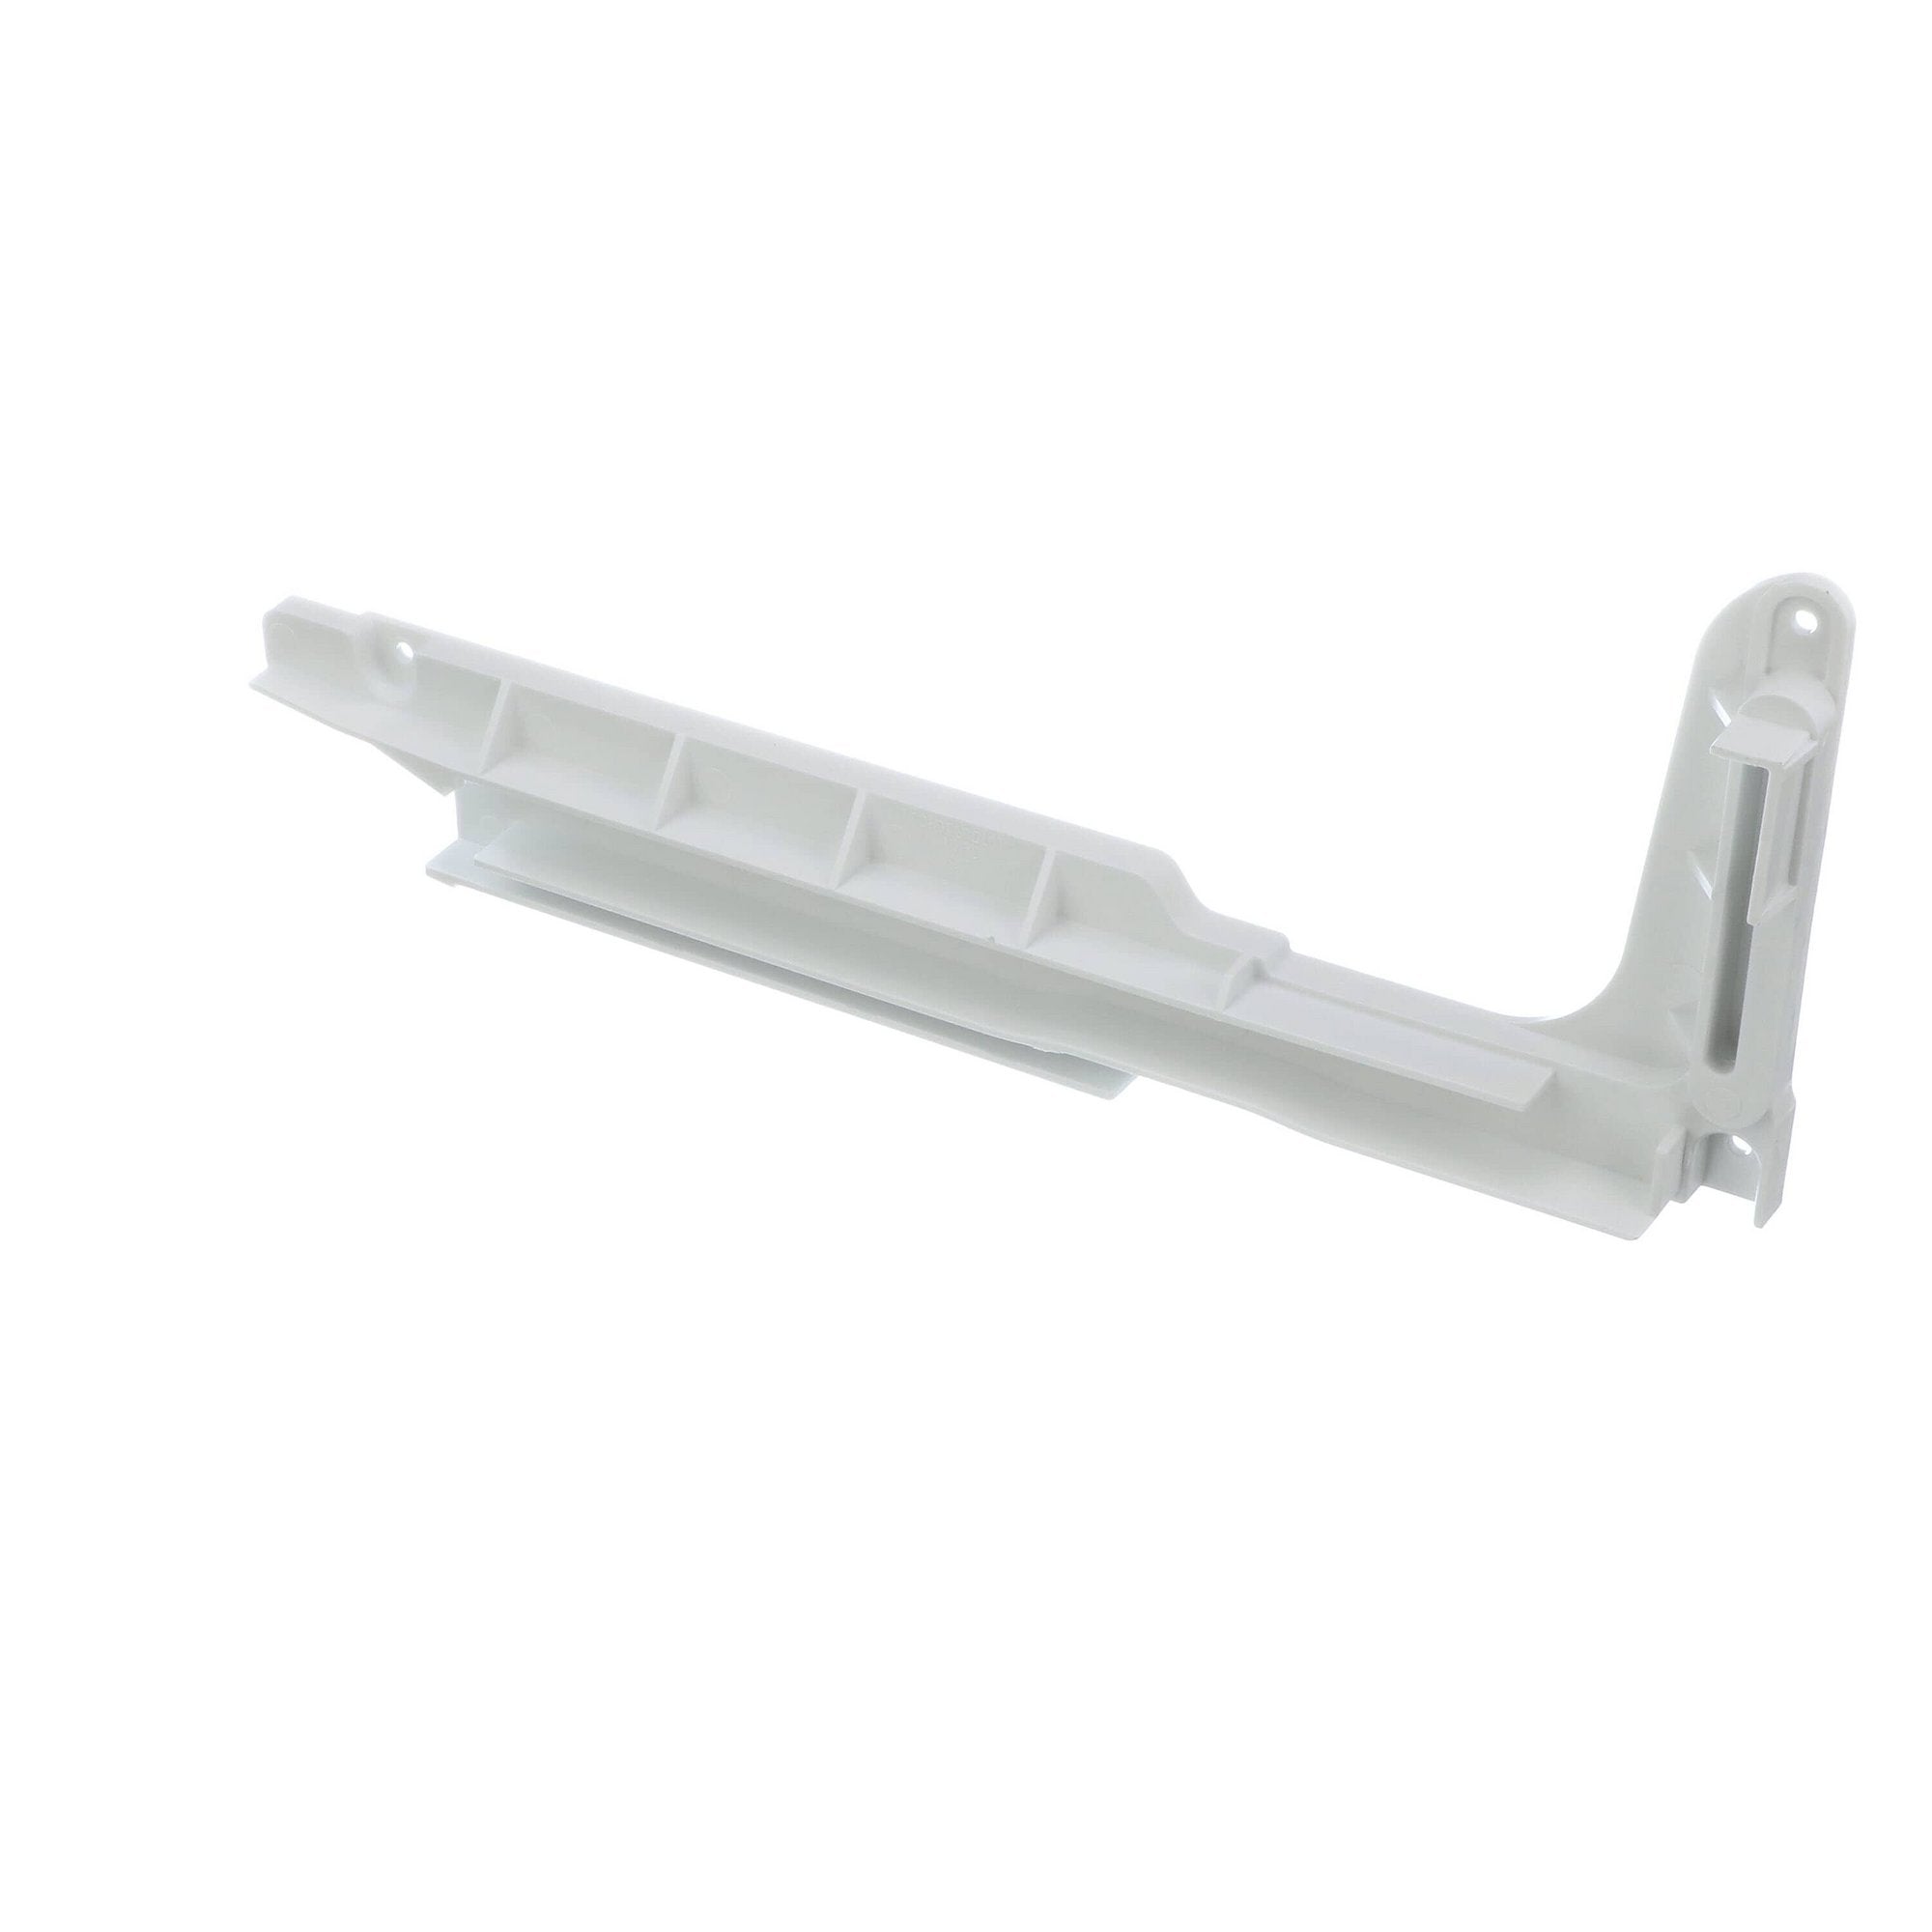 WR72X10234 - GE Refrigerator Ice Container Slide Rail New